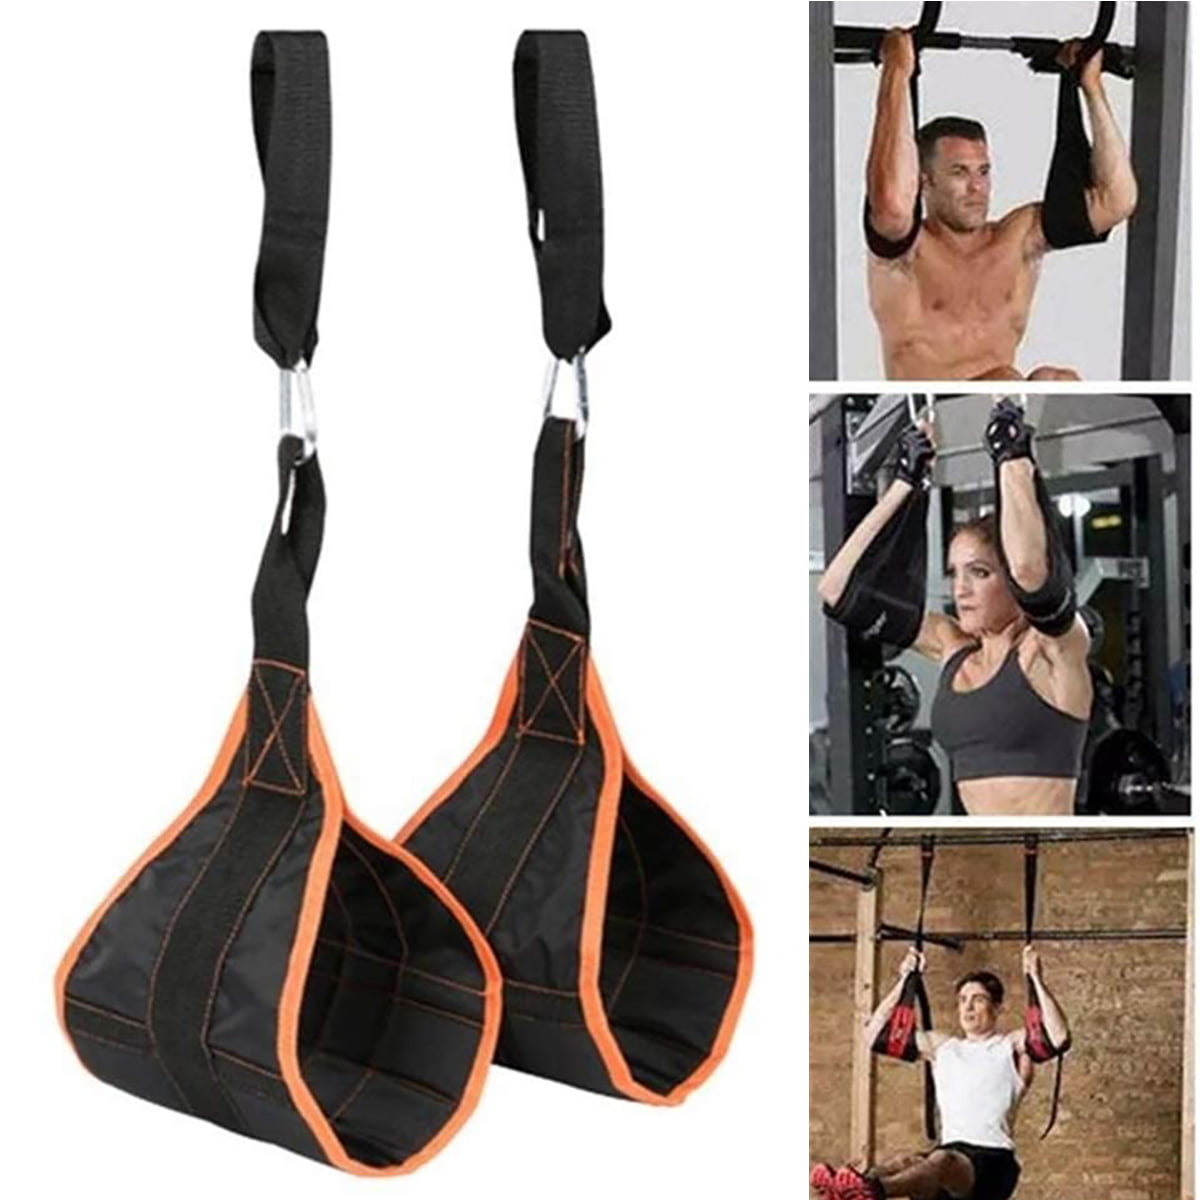 Capital Sports Armlug Arm & Ab Slings Metal Snap Hooks Max. 120kg, For Effective Abdominal Training, Softly Padded Arm Straps with 19cm Width